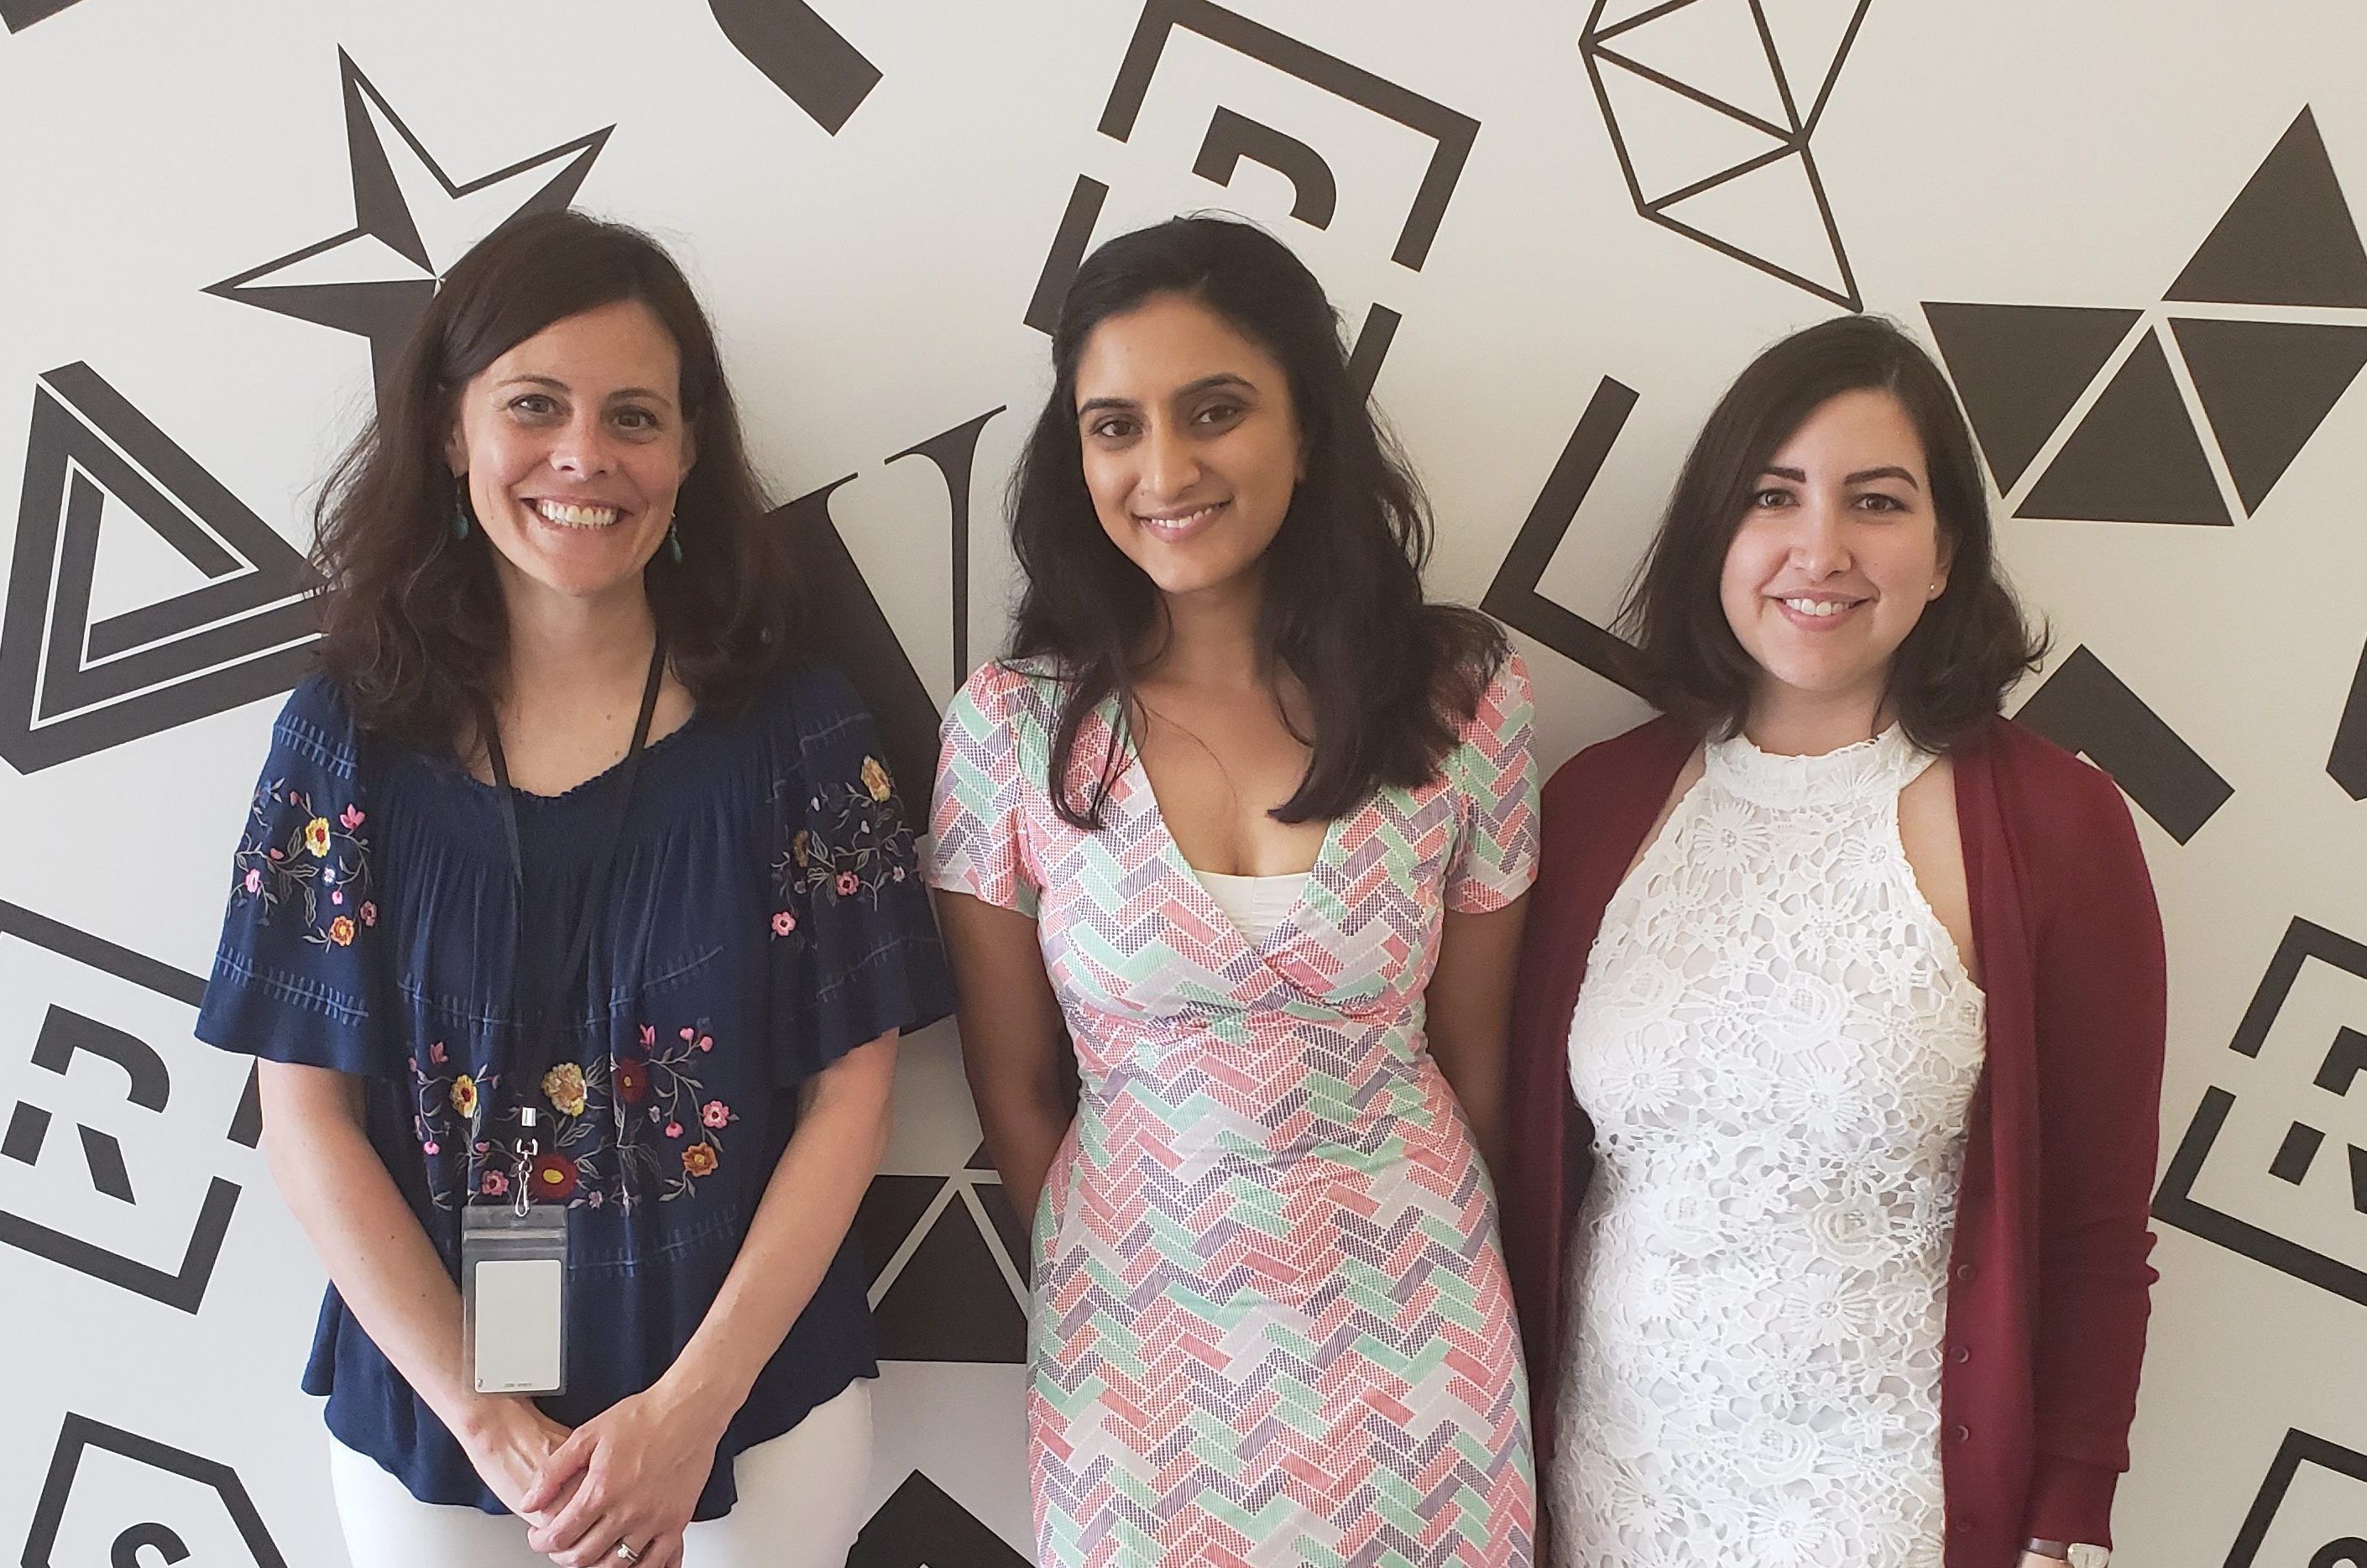 Flaviana Sandoval from Boston University (from right), Divya Mishra from Johns Hopkins Bloomberg School of Public Health and Arianne Henry from Boston University School of Public Health visited Vox as part of their 2018 Pulitzer Center fellowships. Image by Kayla Sharpe. United States, 2018.